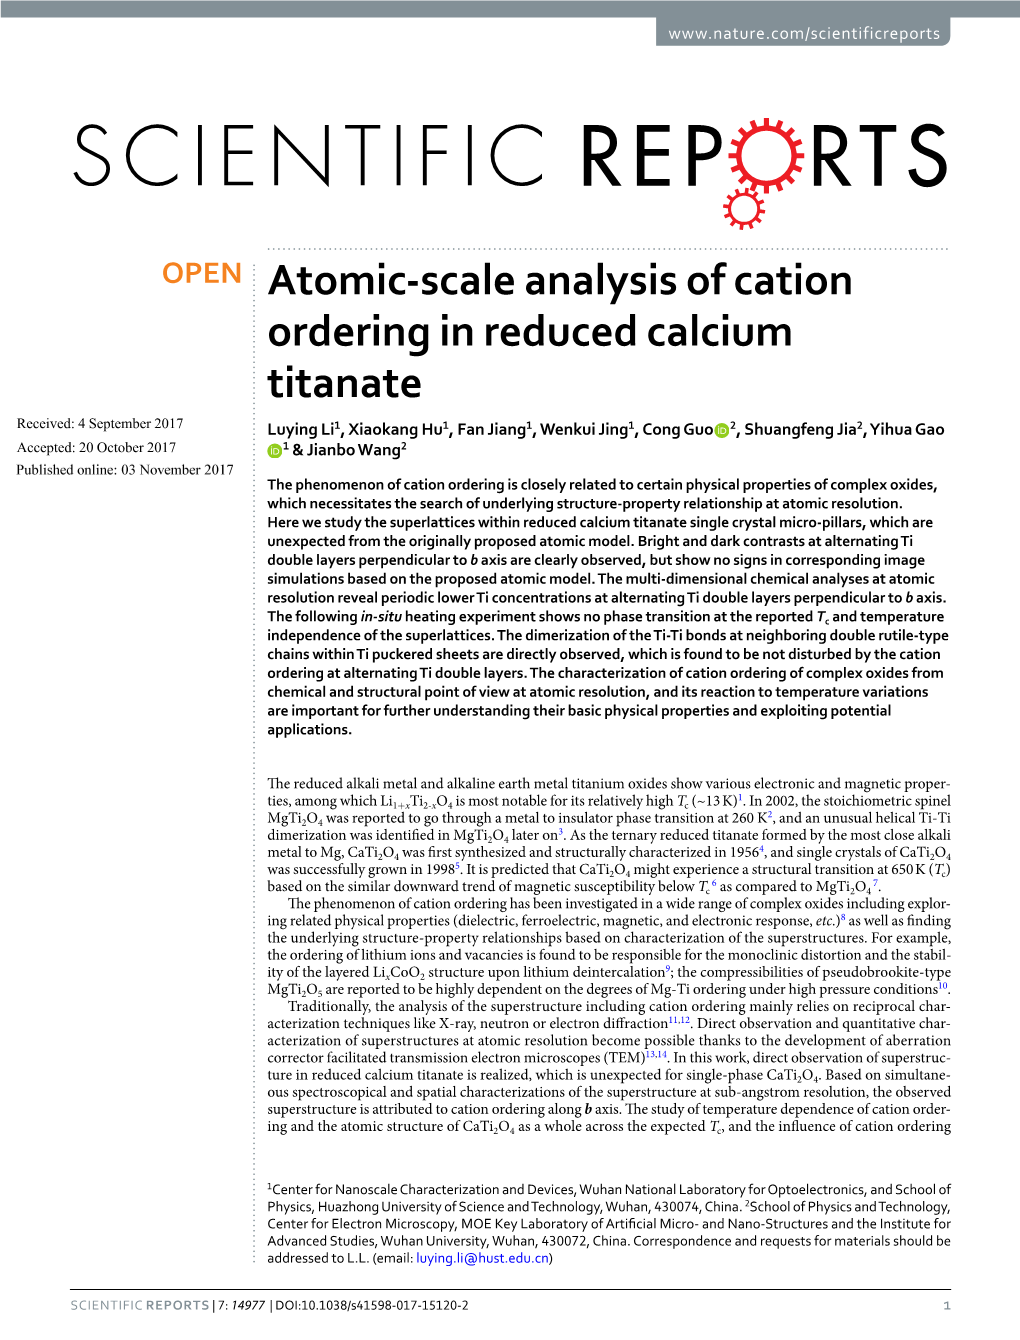 Atomic-Scale Analysis of Cation Ordering in Reduced Calcium Titanate